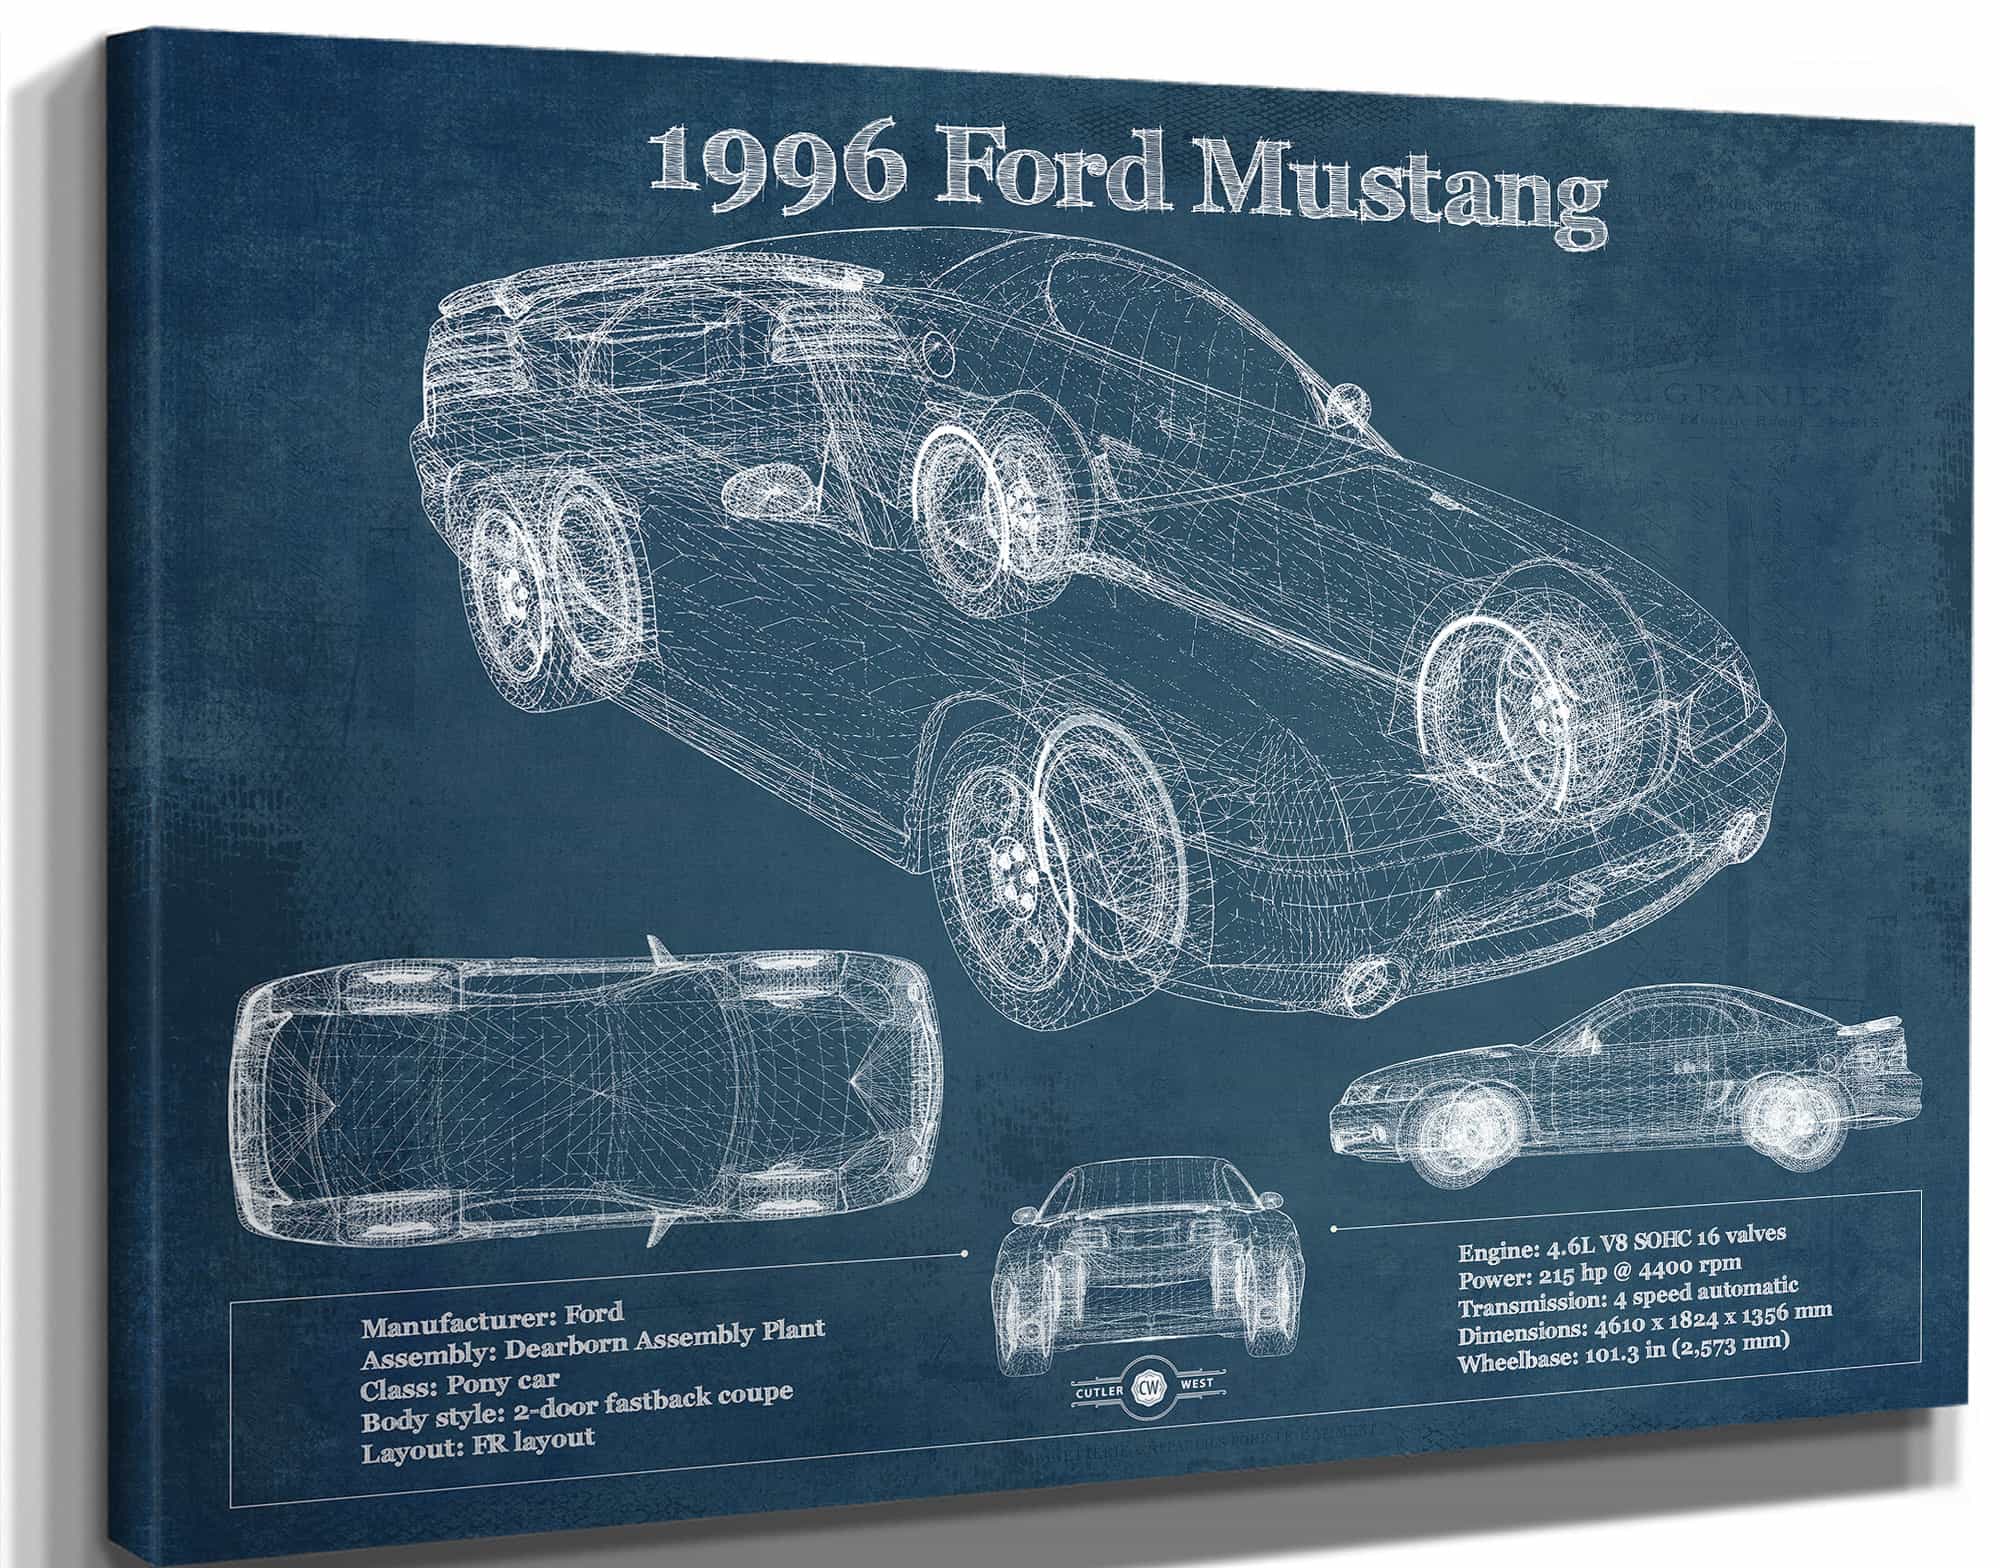 1996 Ford Mustang Coupe Vintage Blueprint Auto Print